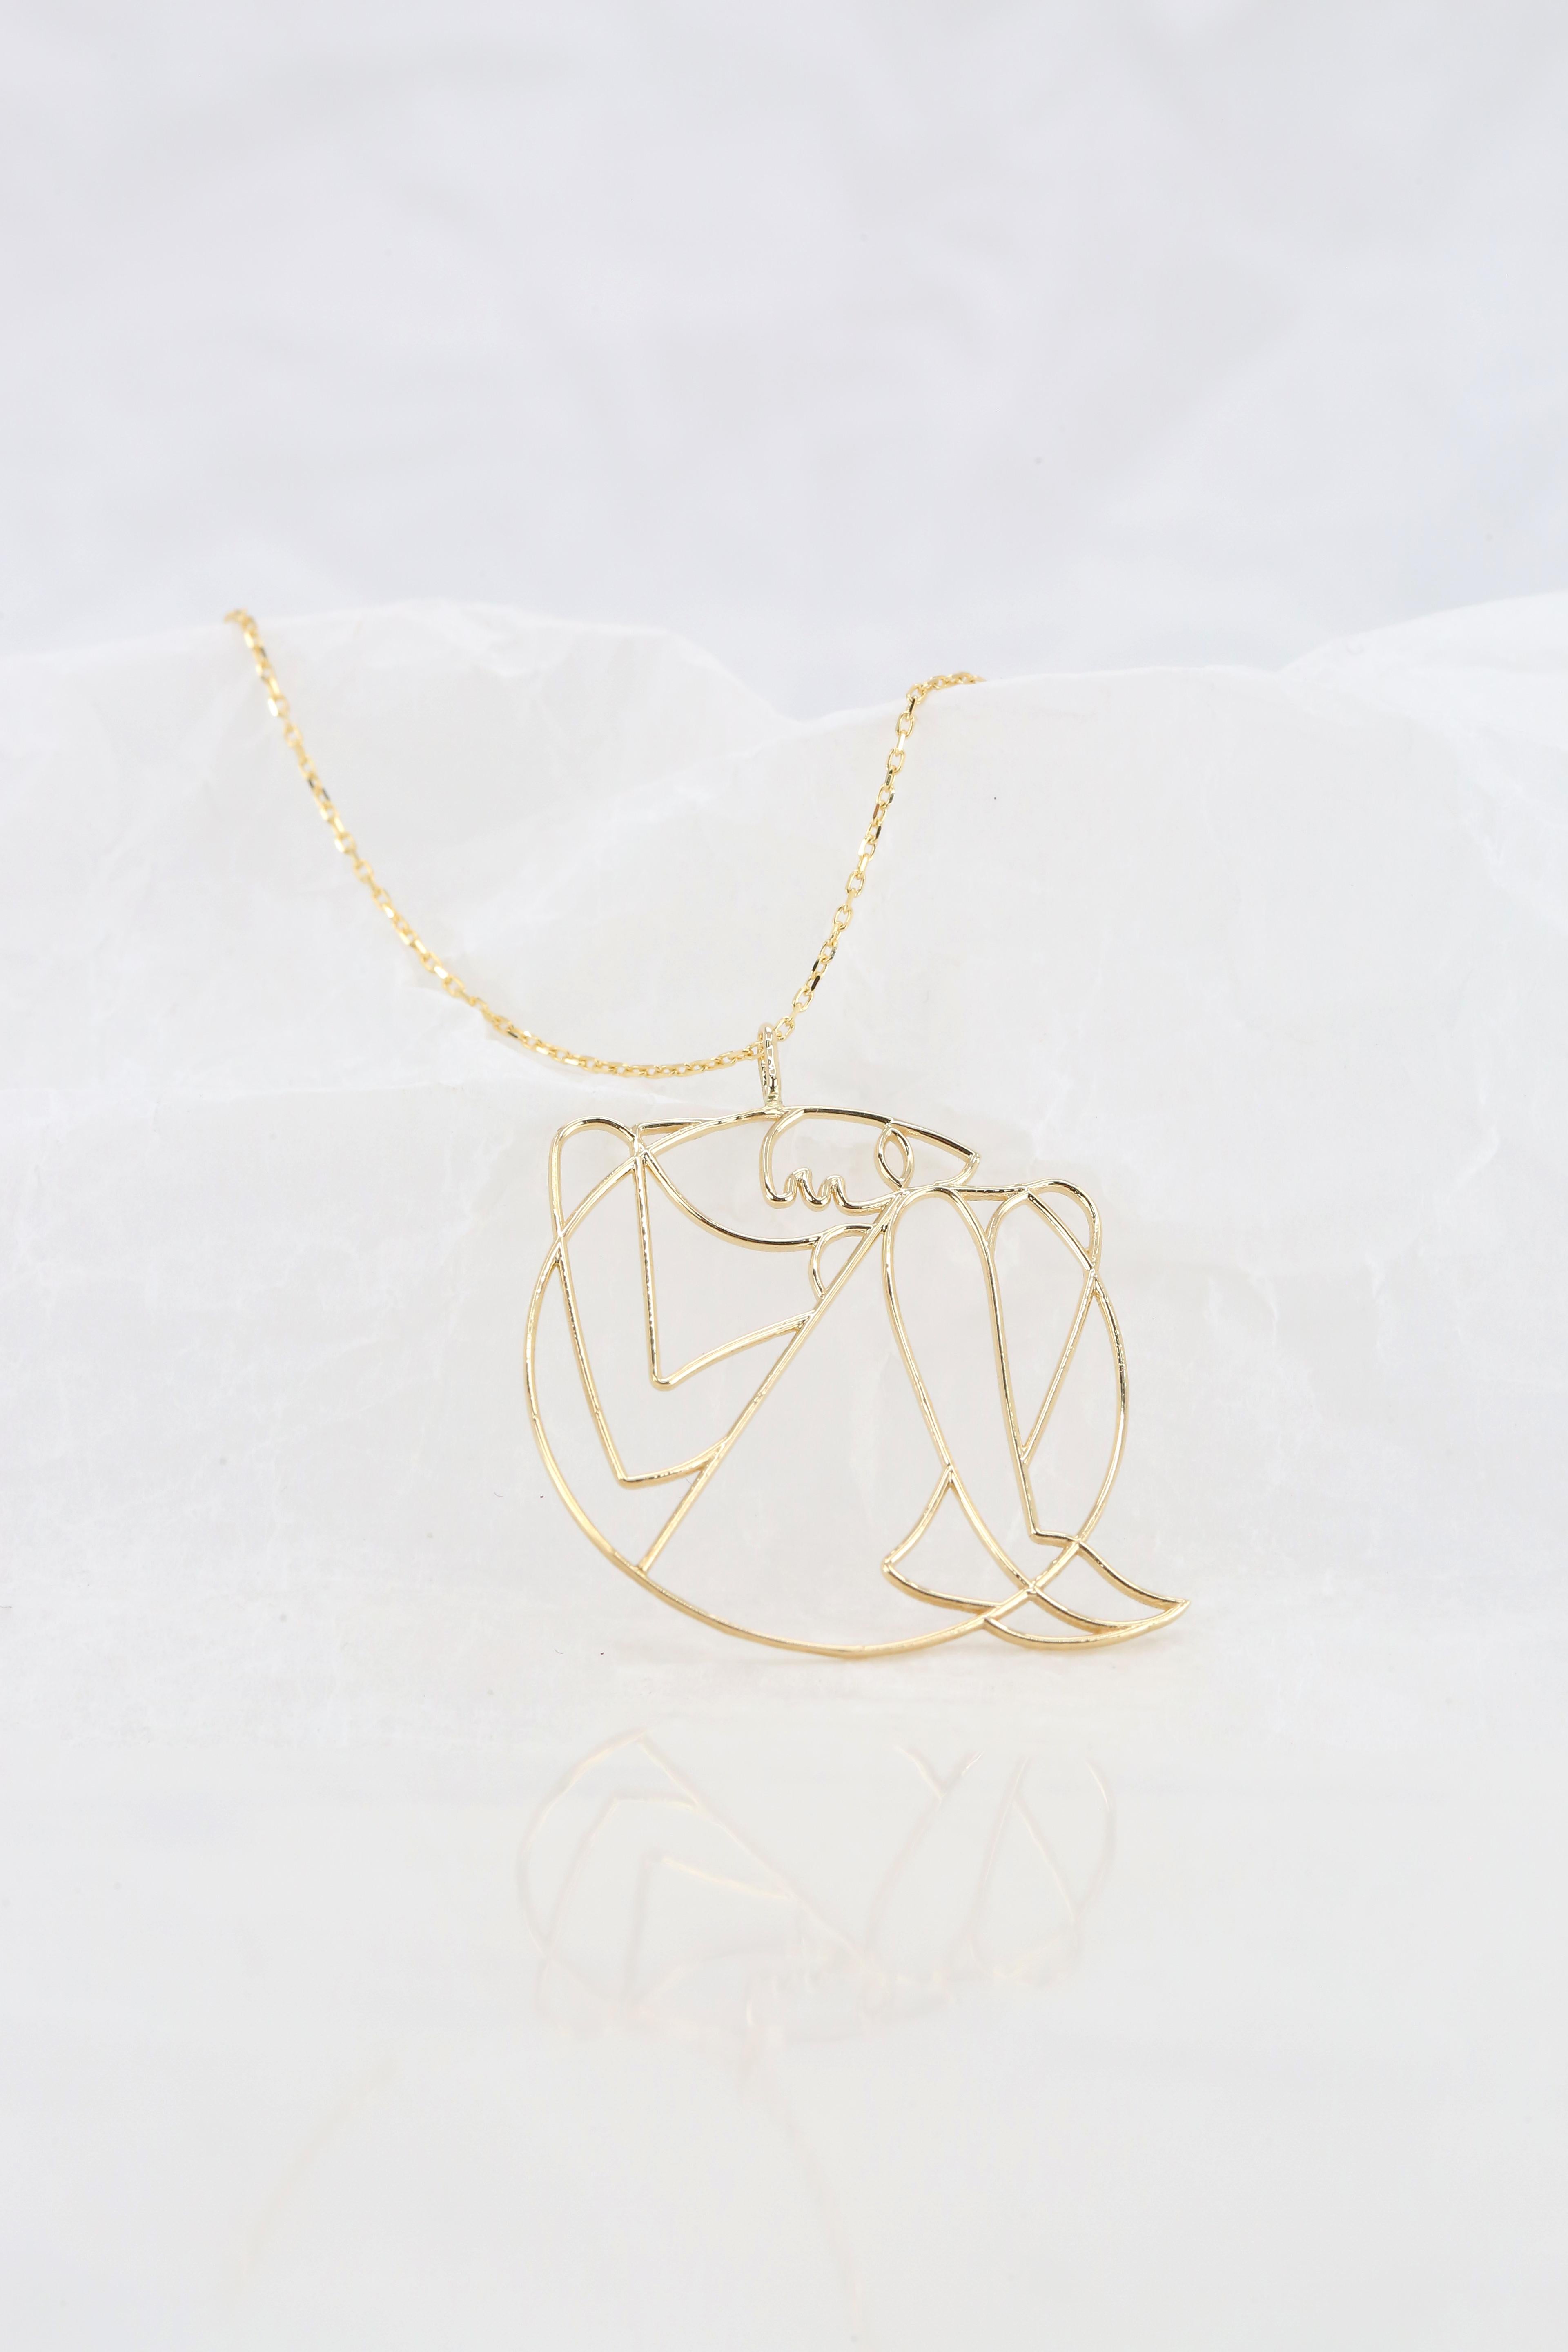 Human in the Womb in Fetal Position Necklace 14k Gold, Golden Ratio Necklace In New Condition For Sale In ISTANBUL, TR